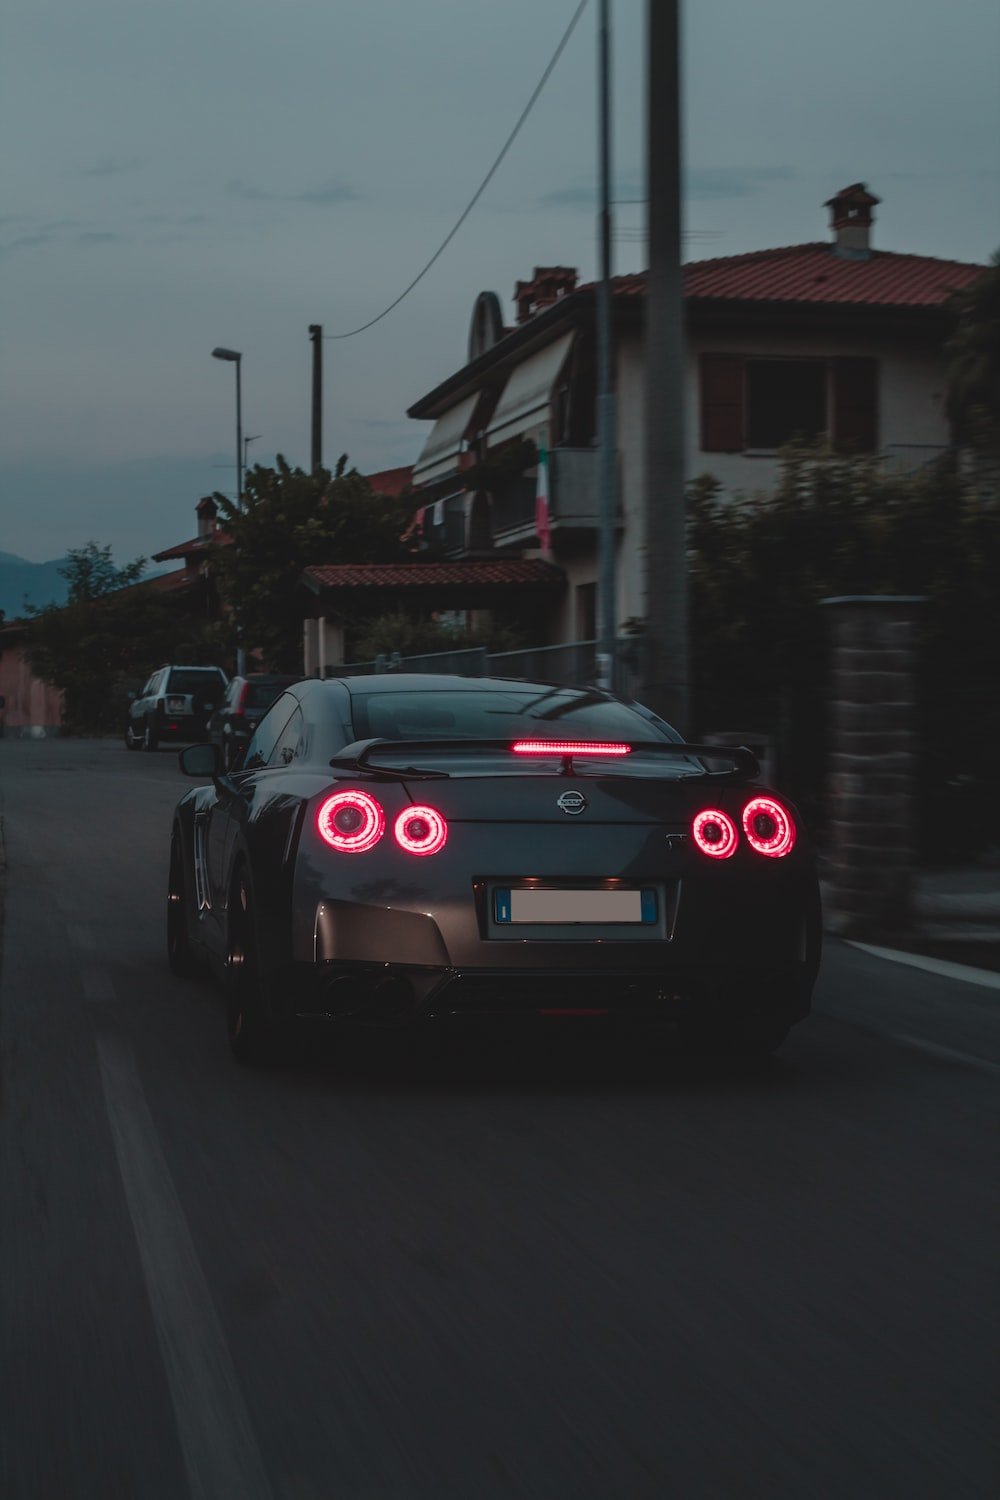 Gtr Picture. Download Free Image